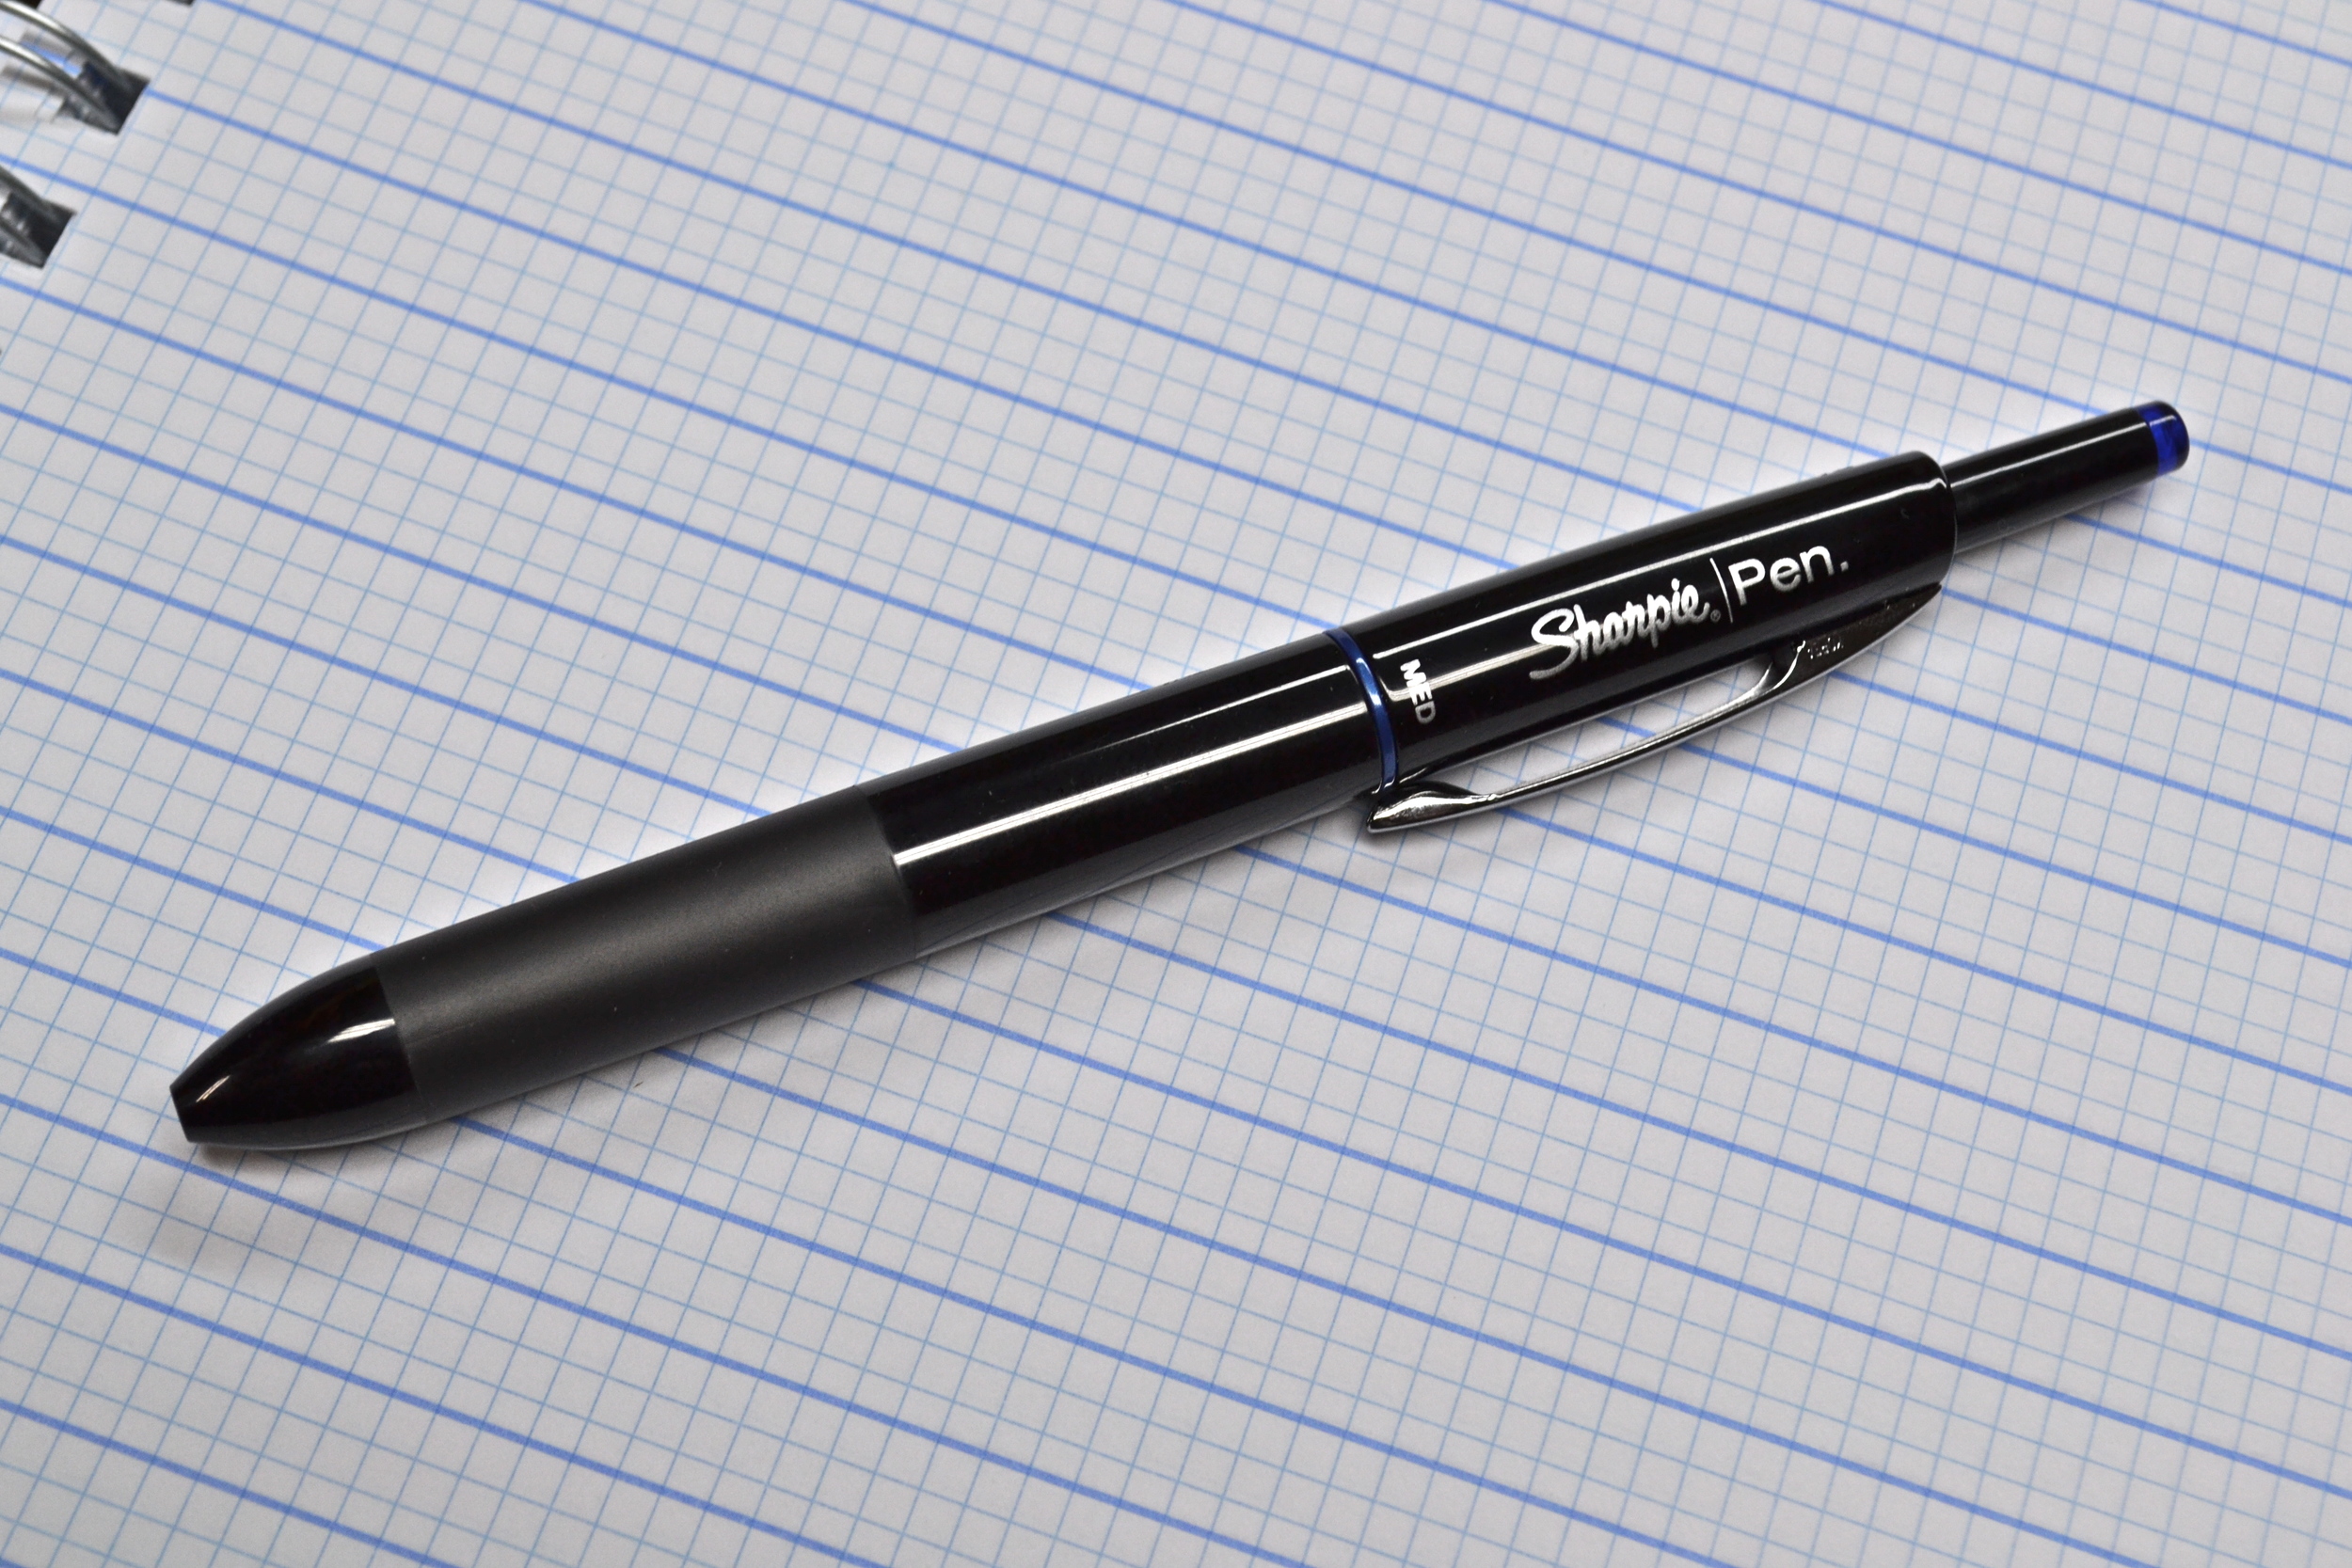 Sharpie Pen Retractable - in Medium! (blue of course) — The Clicky Post